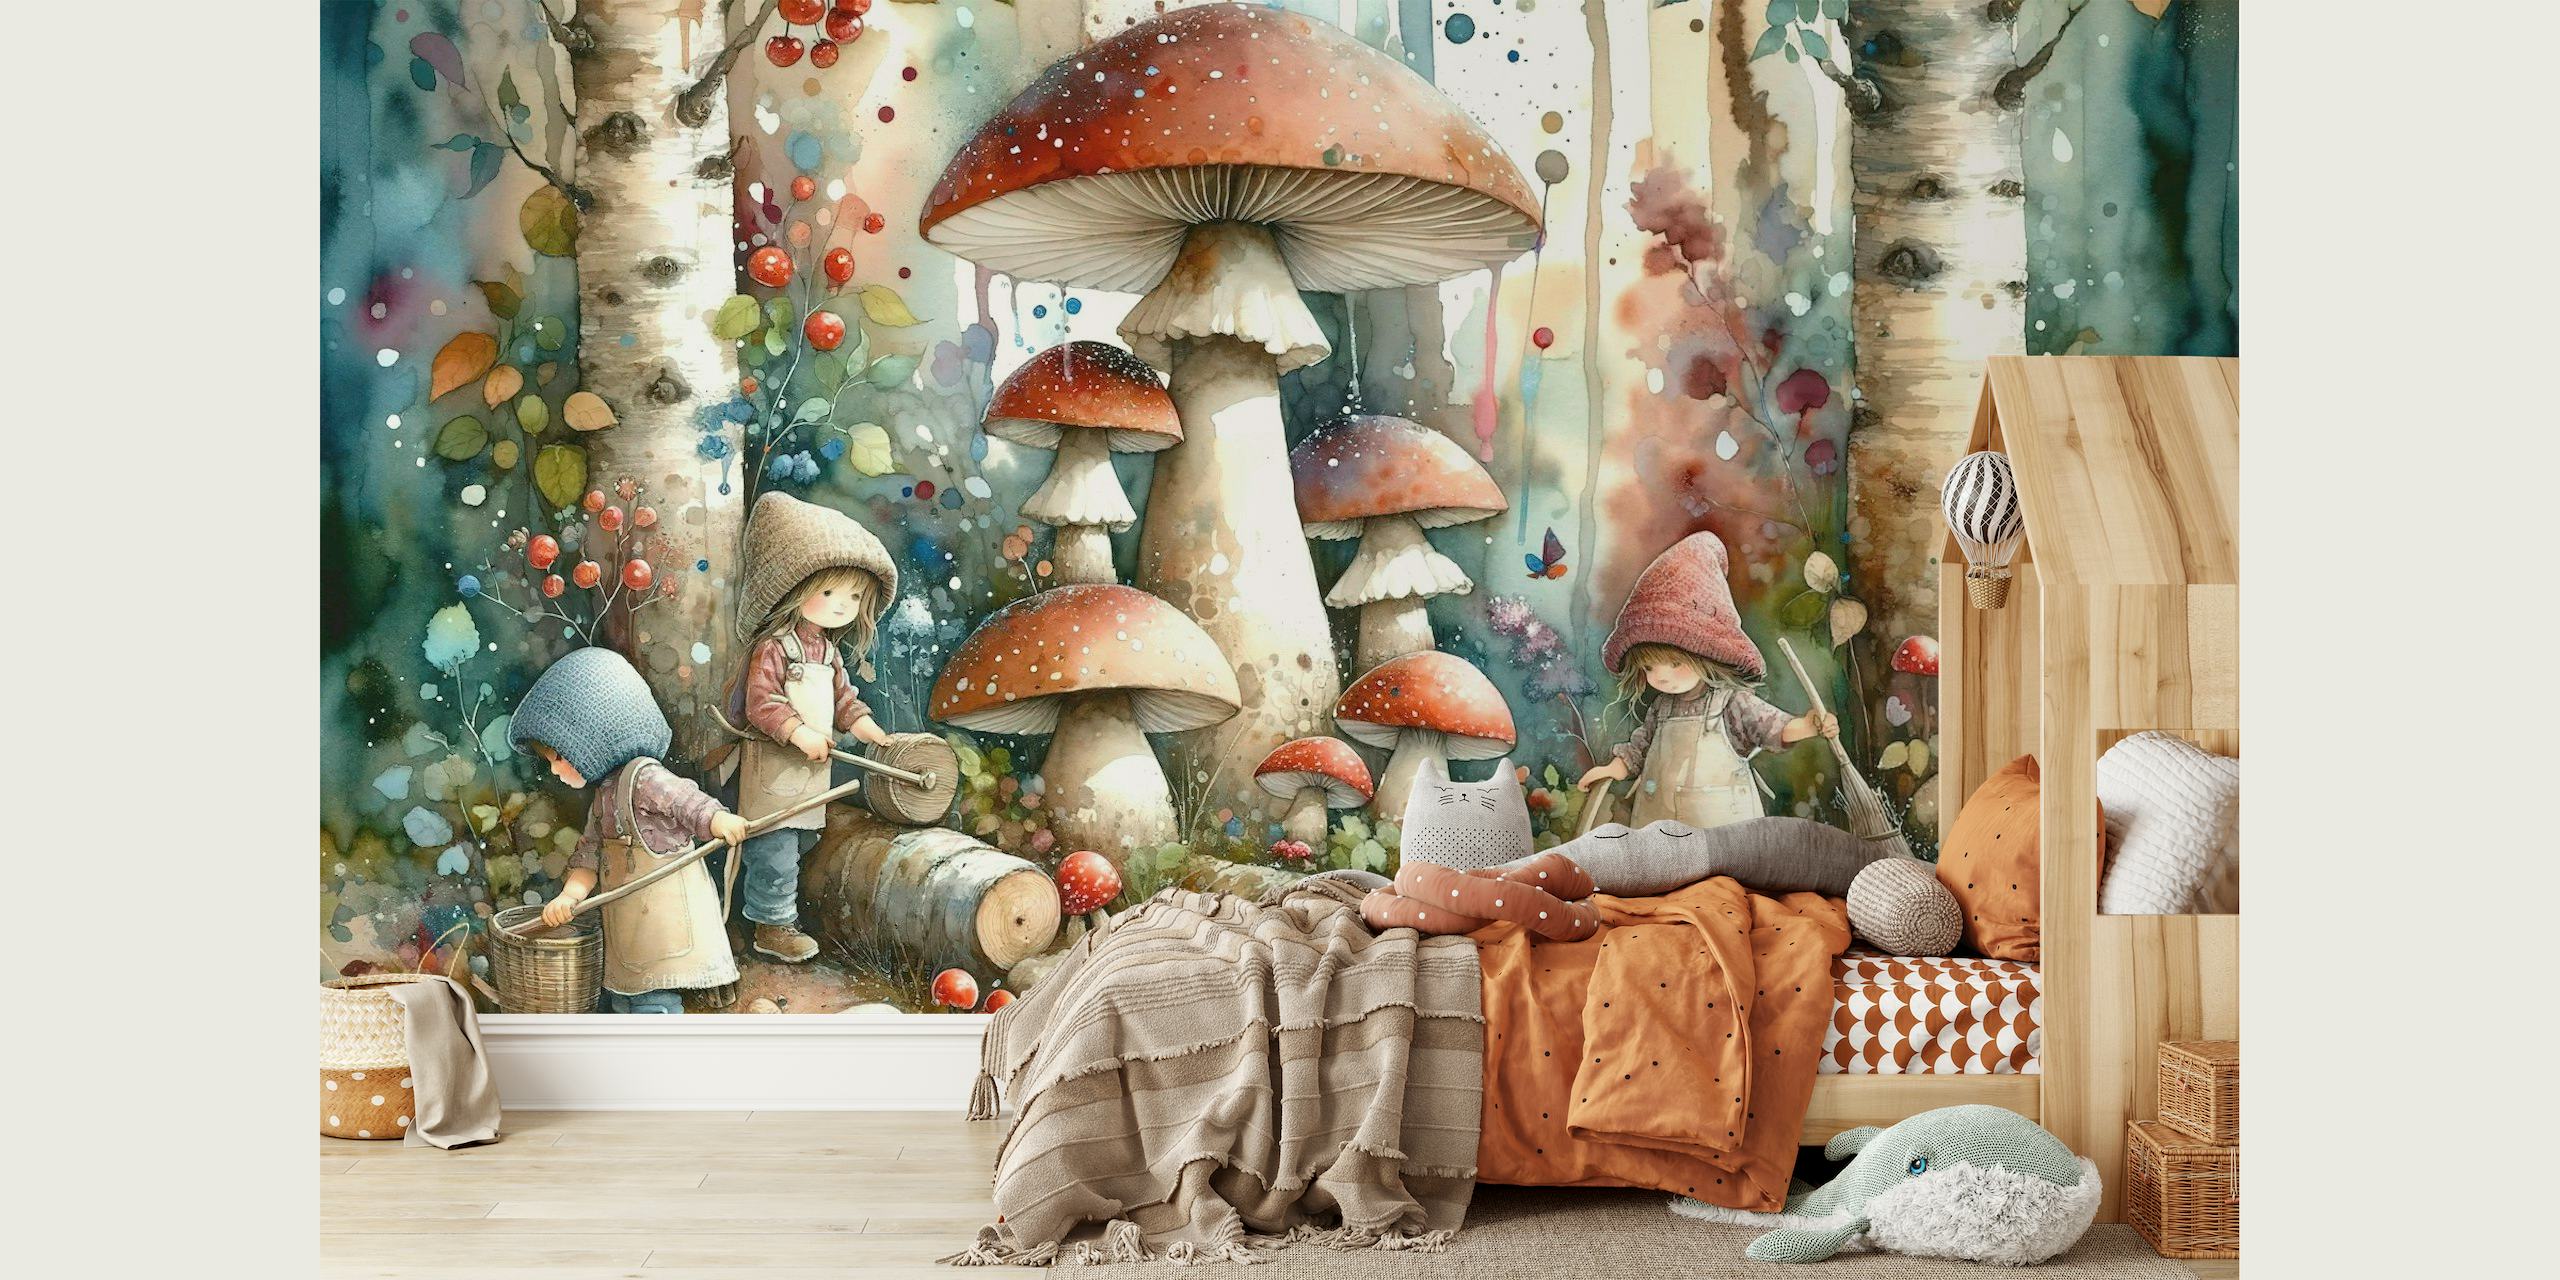 Enchanted Forest Whimsy in Watercolor Dreams wallpaper